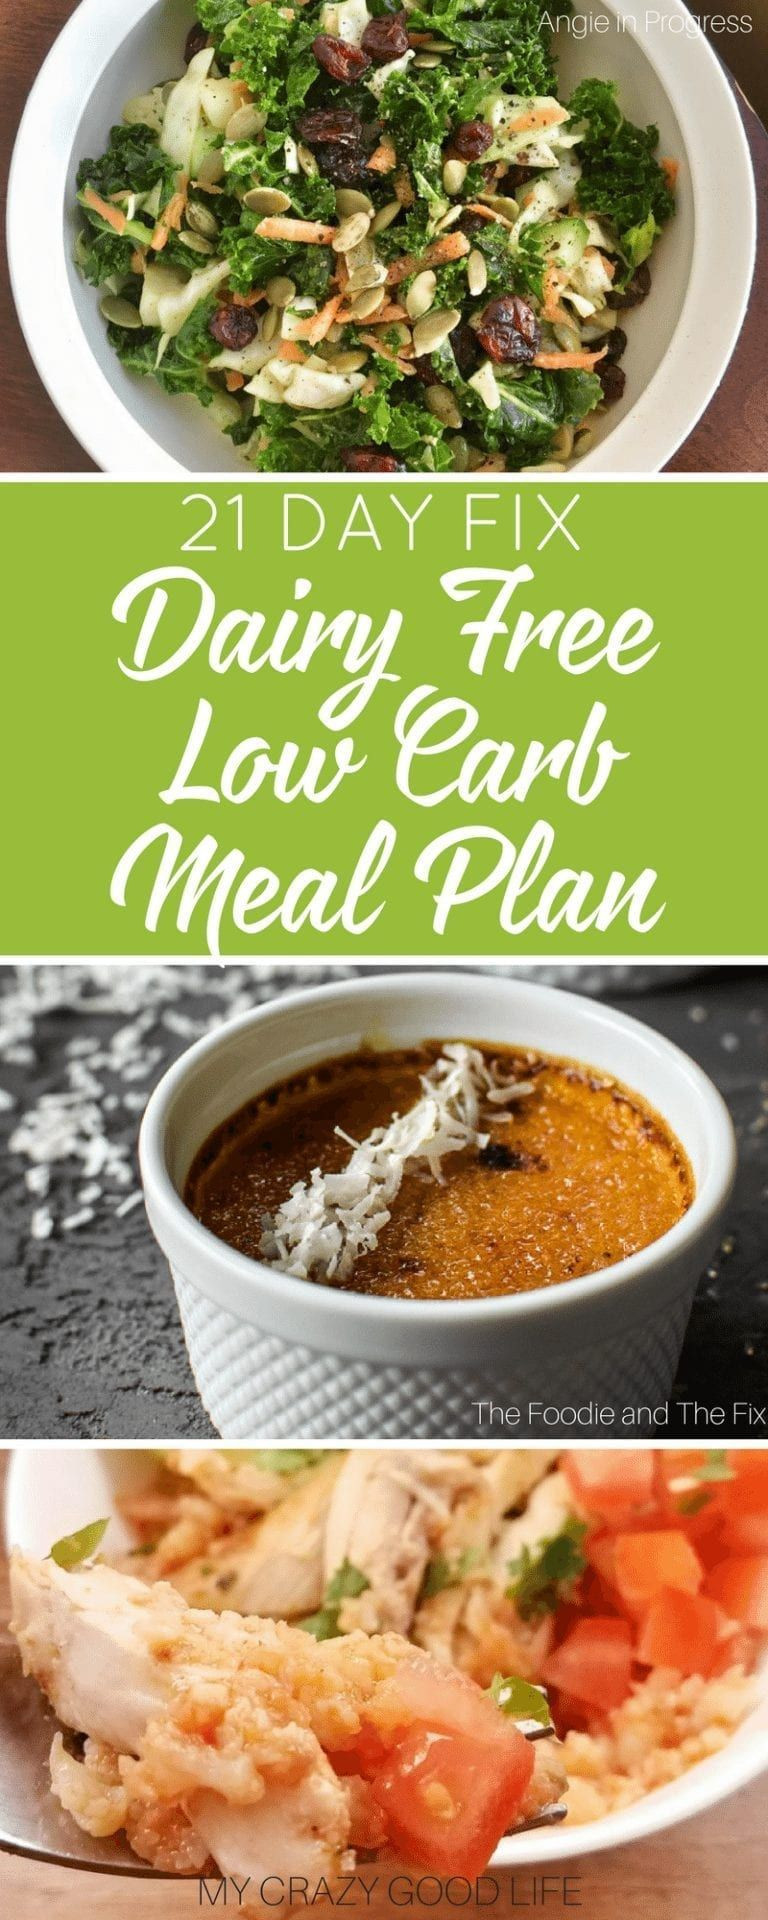 Low Carb Diet Plan 21 Days Clean Eating
 21 Day Fix Dairy Free Low Carb Meal Plan Ideas